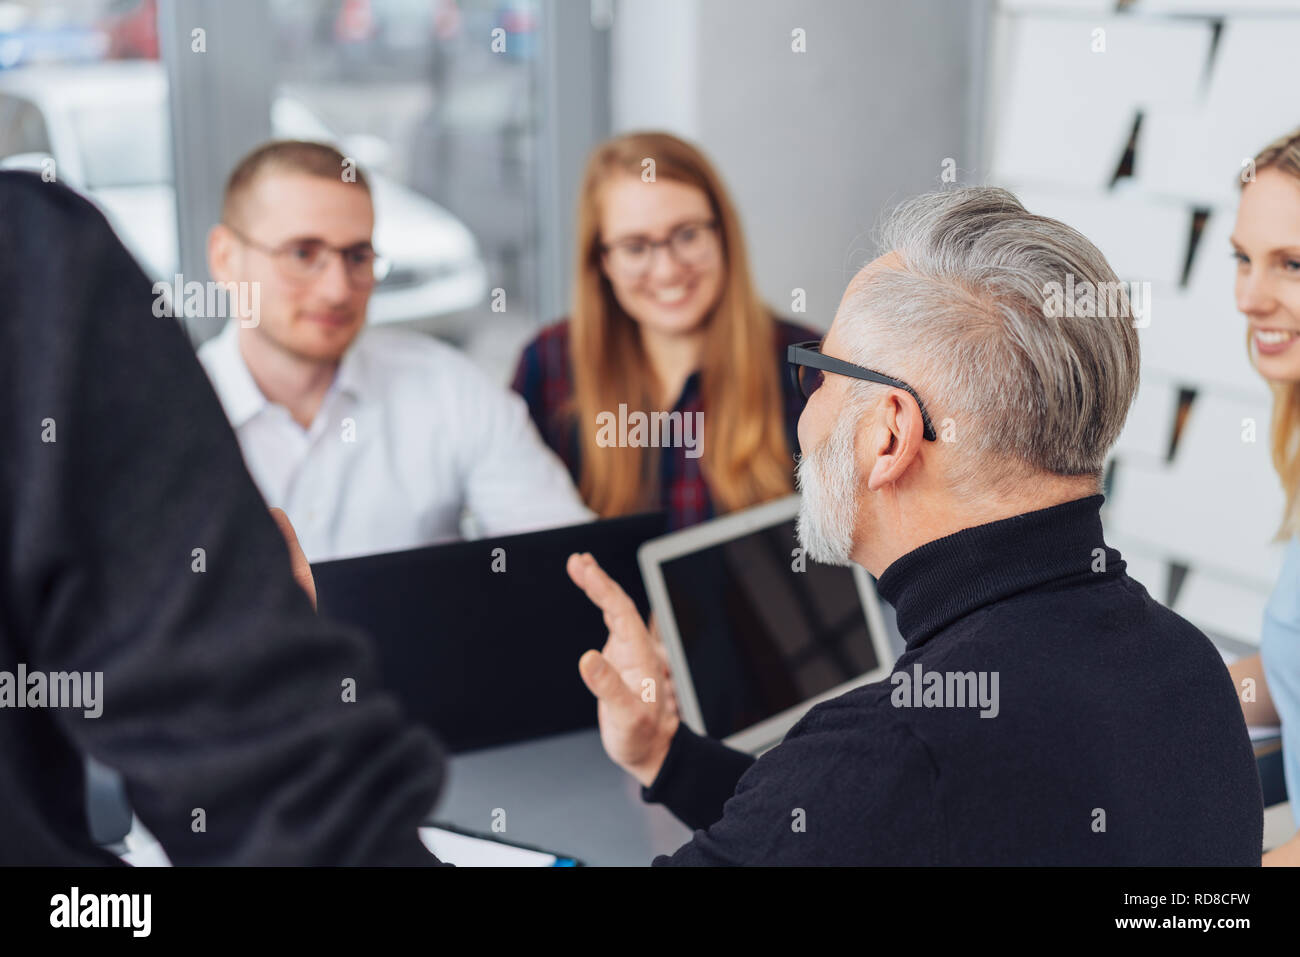 Senior team leading talking to his business team gesturing with his hands as he explains with focus to a young man and woman Stock Photo